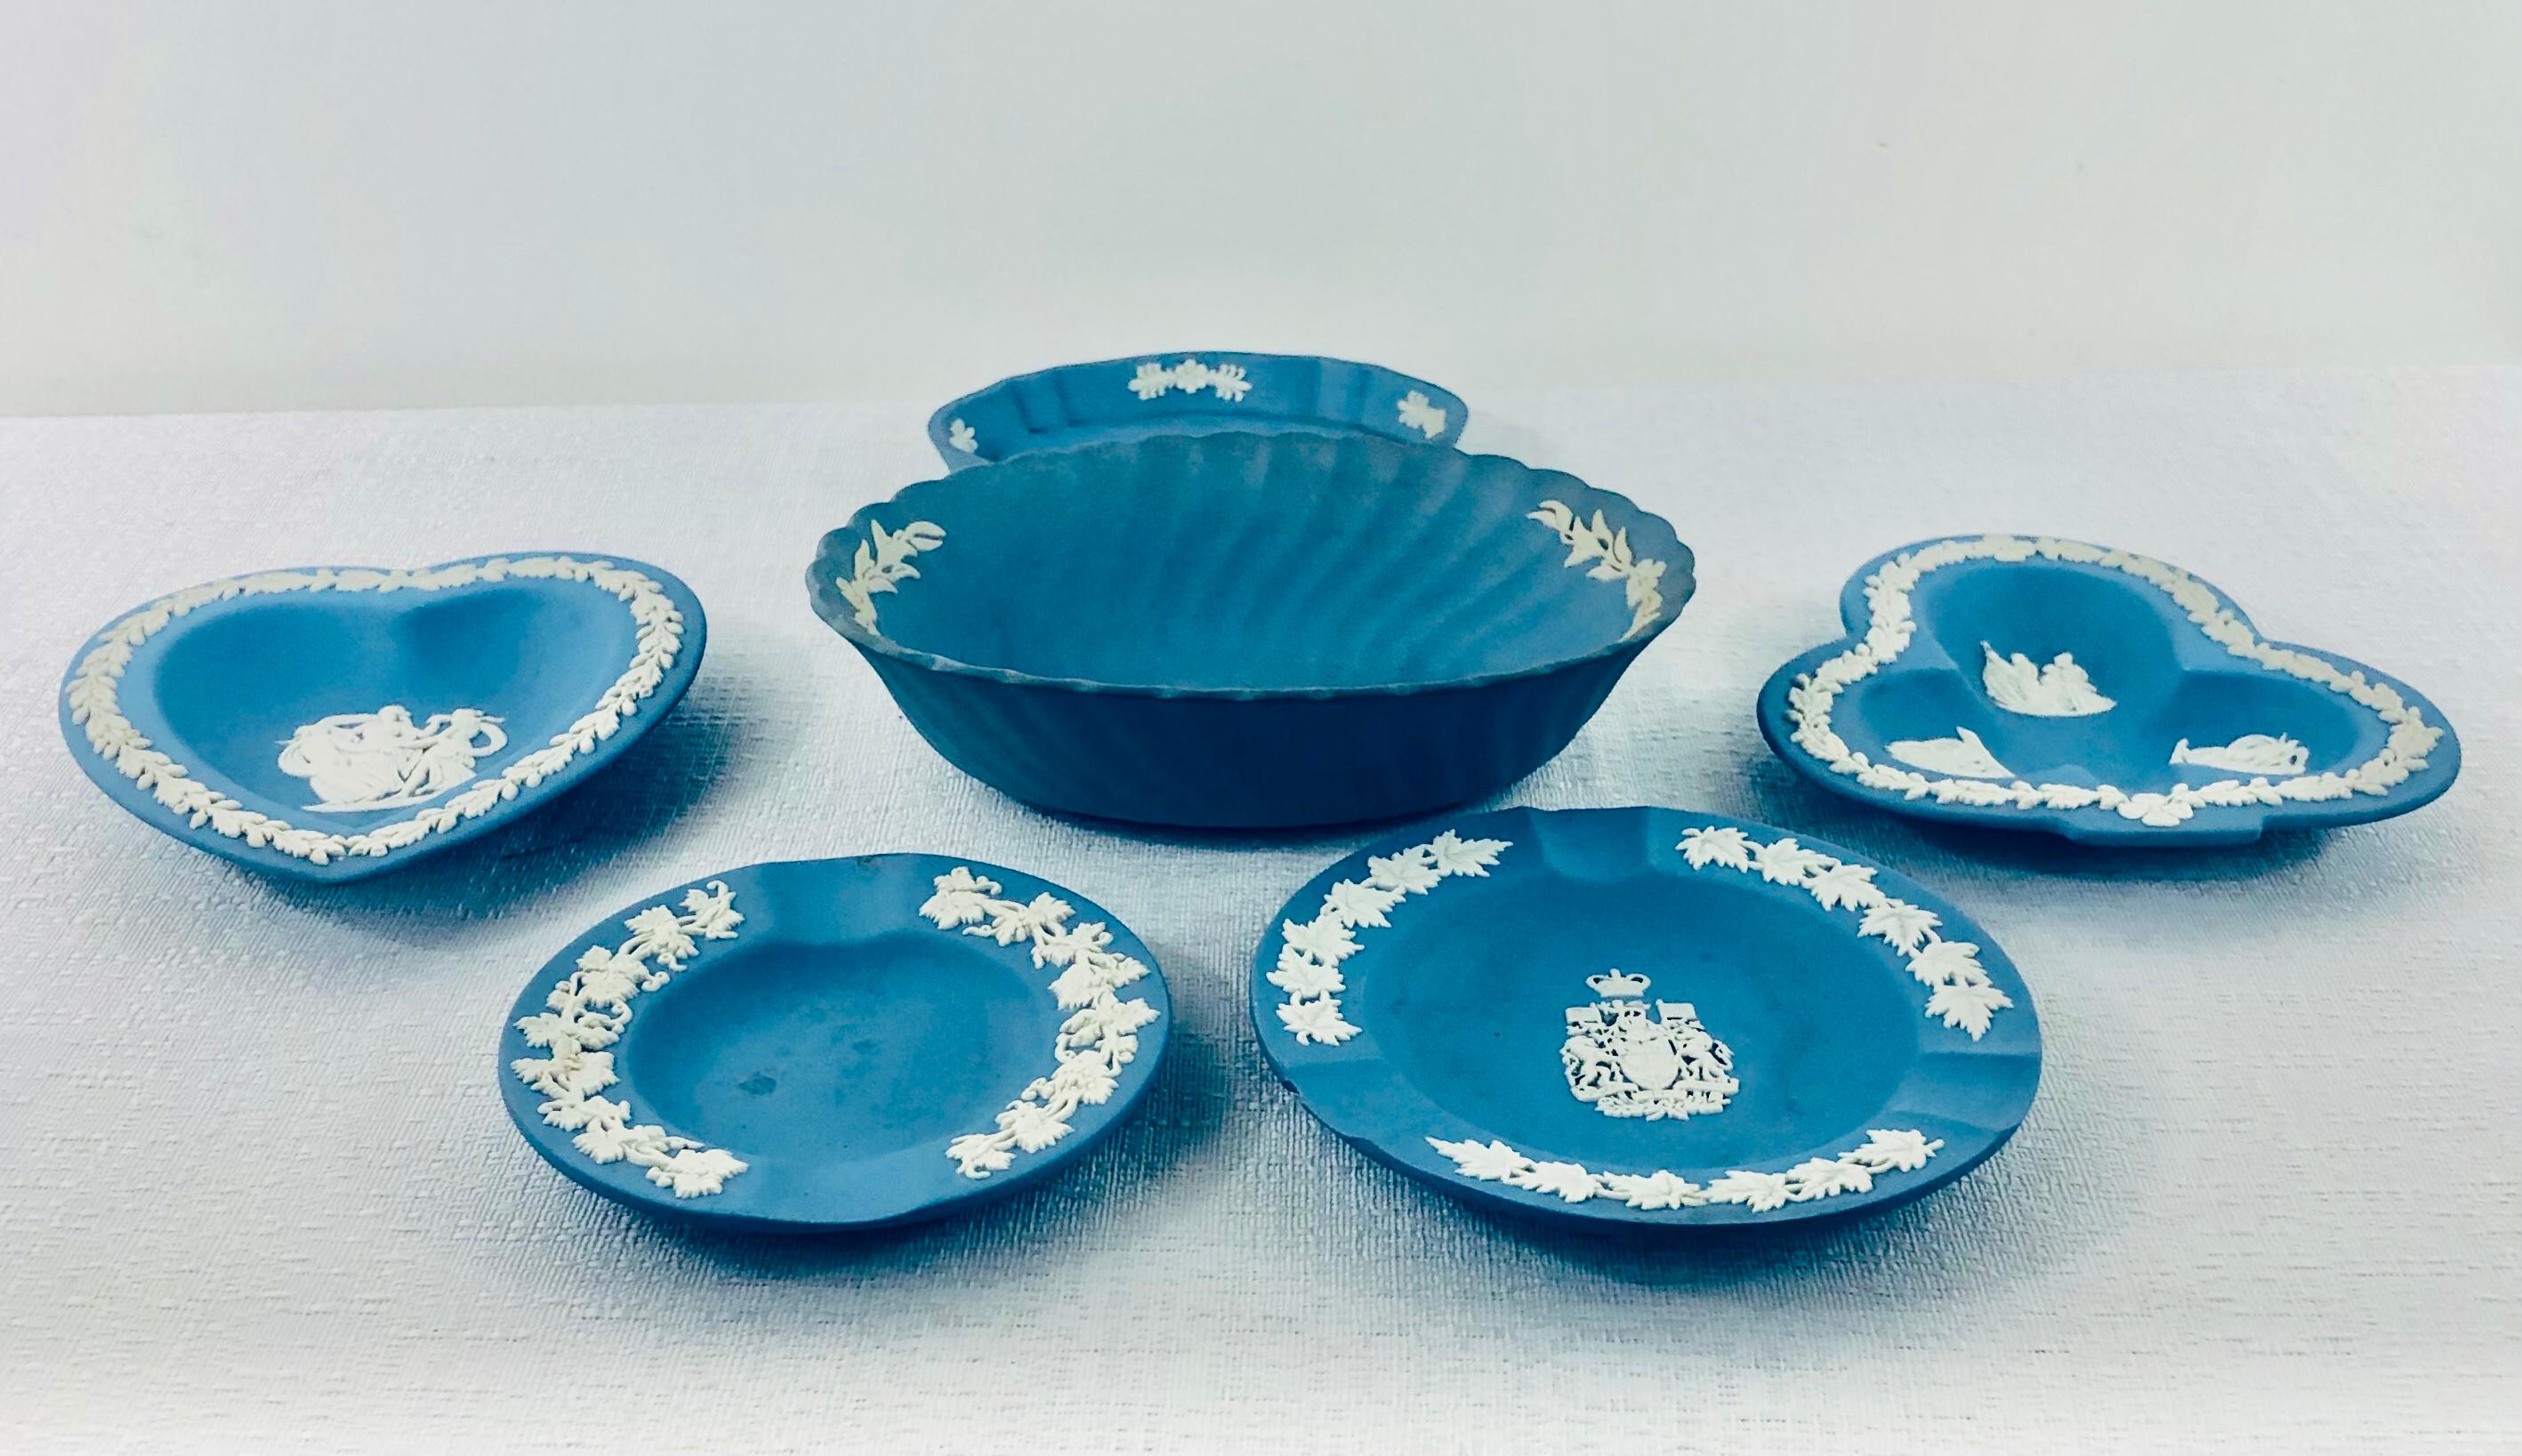 A set of 6 English Wedgwood Jasperware decorative plates in “Wedgwood Blue”. Each piece features a white design depicting high relief acanthus leaves and white sprigged reliefs. 

About Jasperware: Jasperware, or jasper ware, is a type of pottery